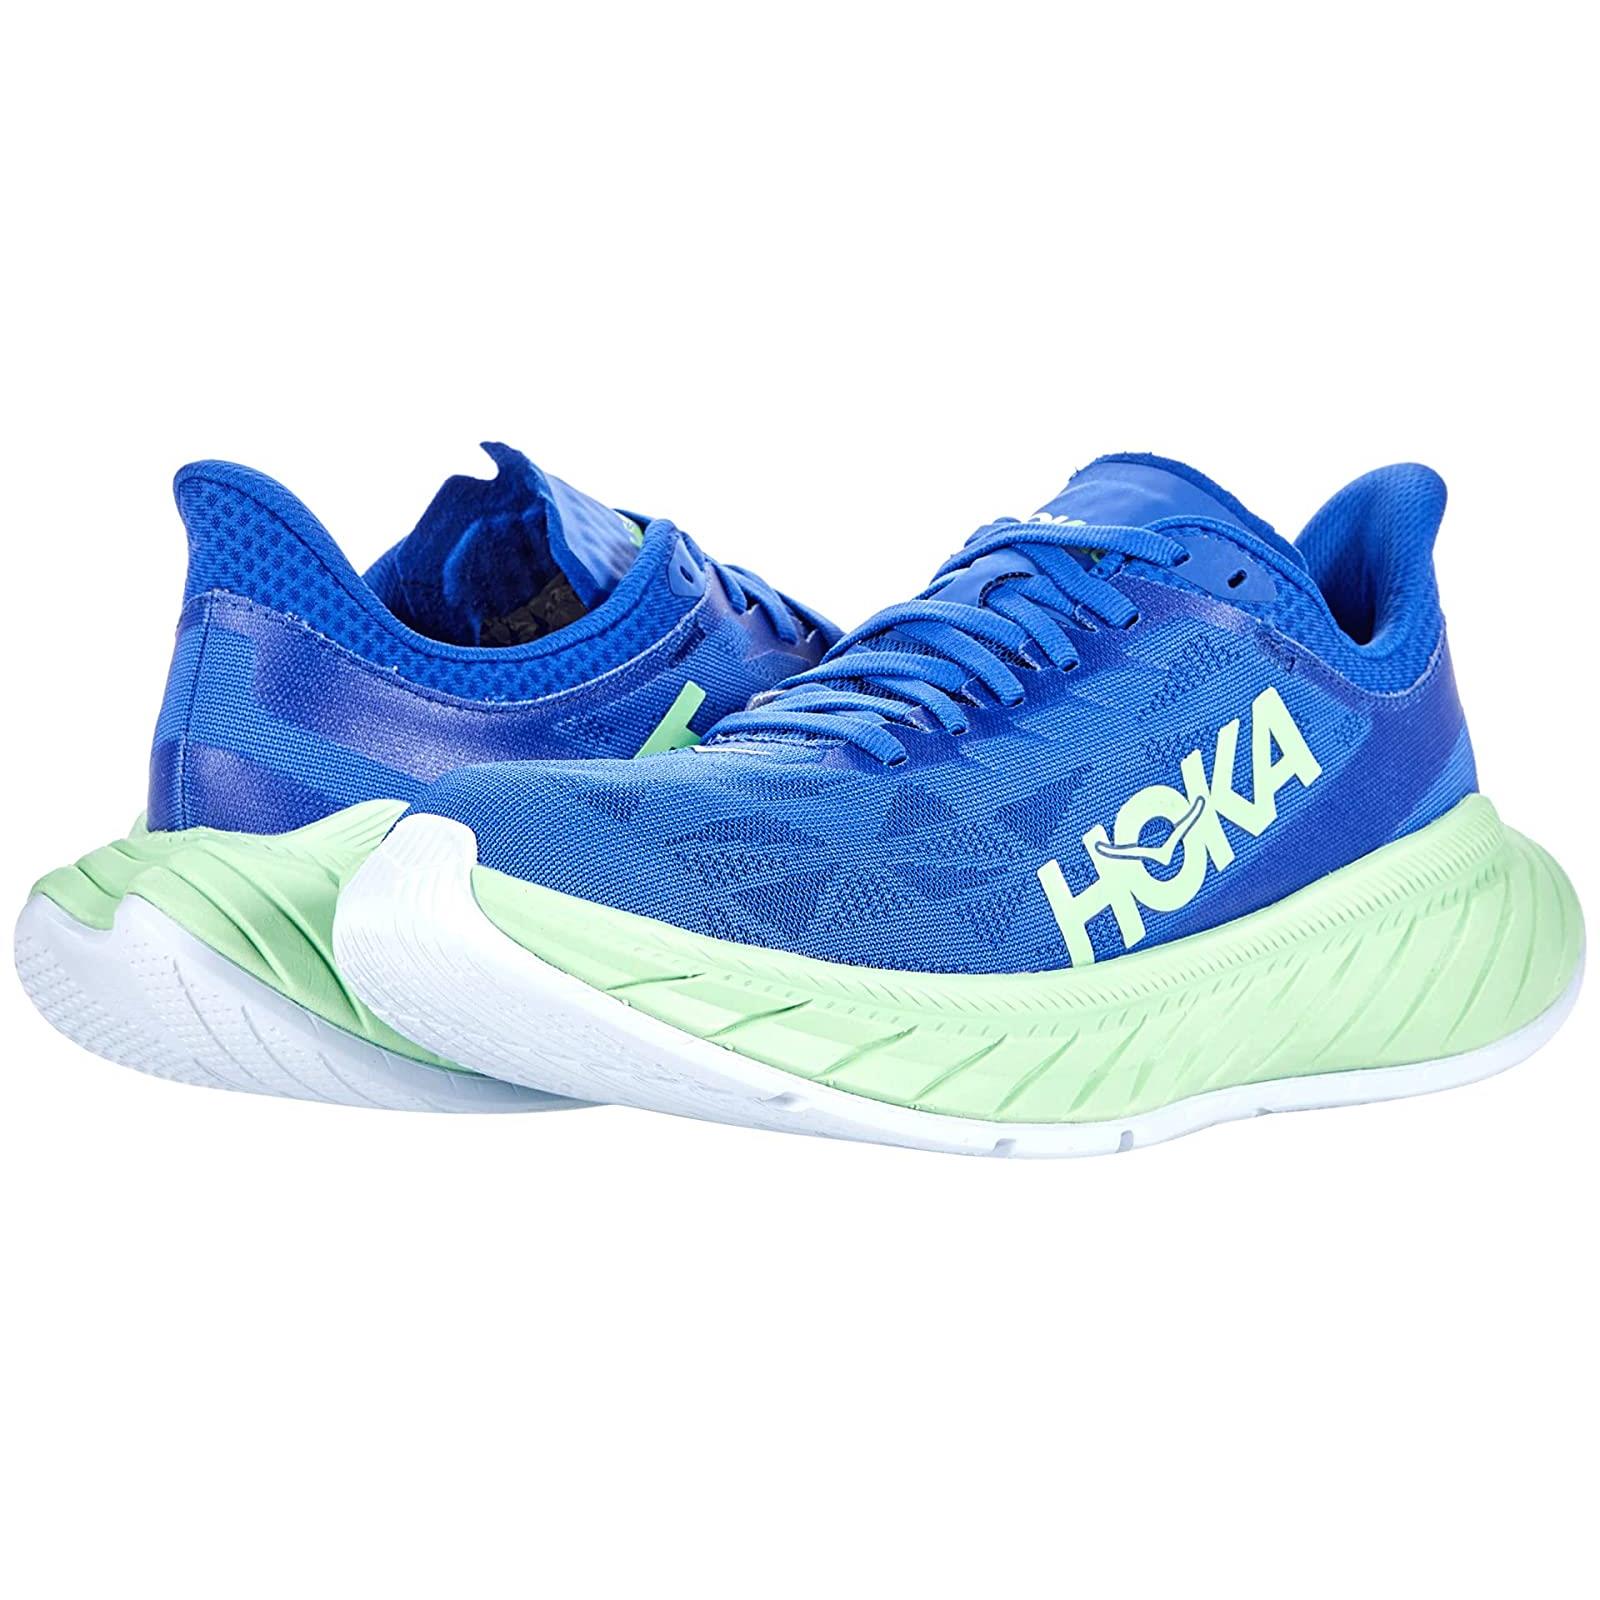 Man`s Sneakers Athletic Shoes Hoka One One Carbon X 2 Dazzling Blue/Green Ash